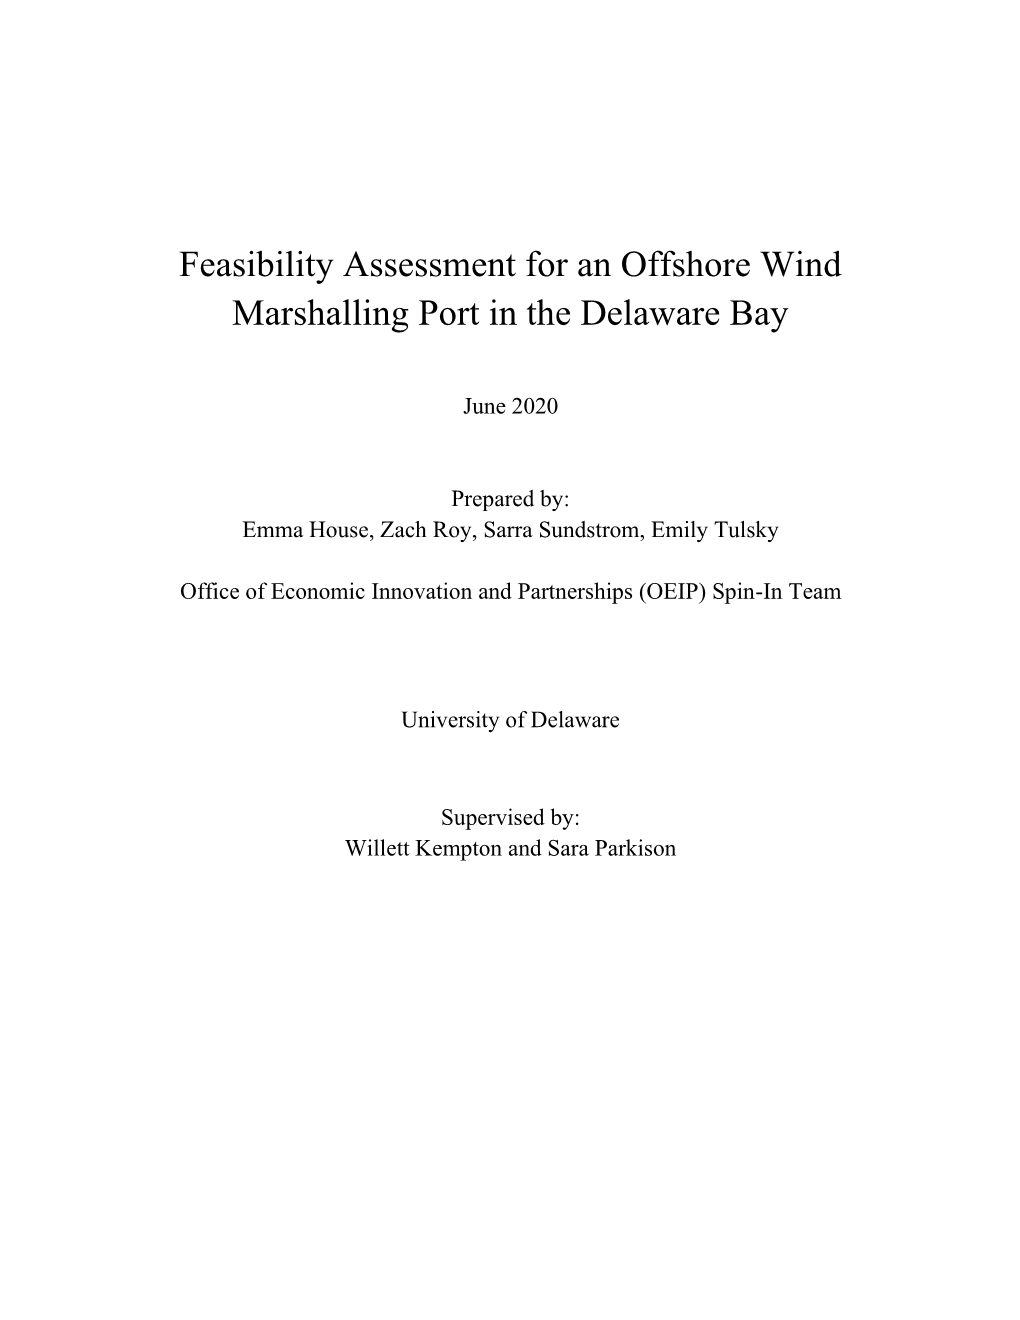 Feasibility Assessment for an Offshore Wind Marshalling Port in the Delaware Bay